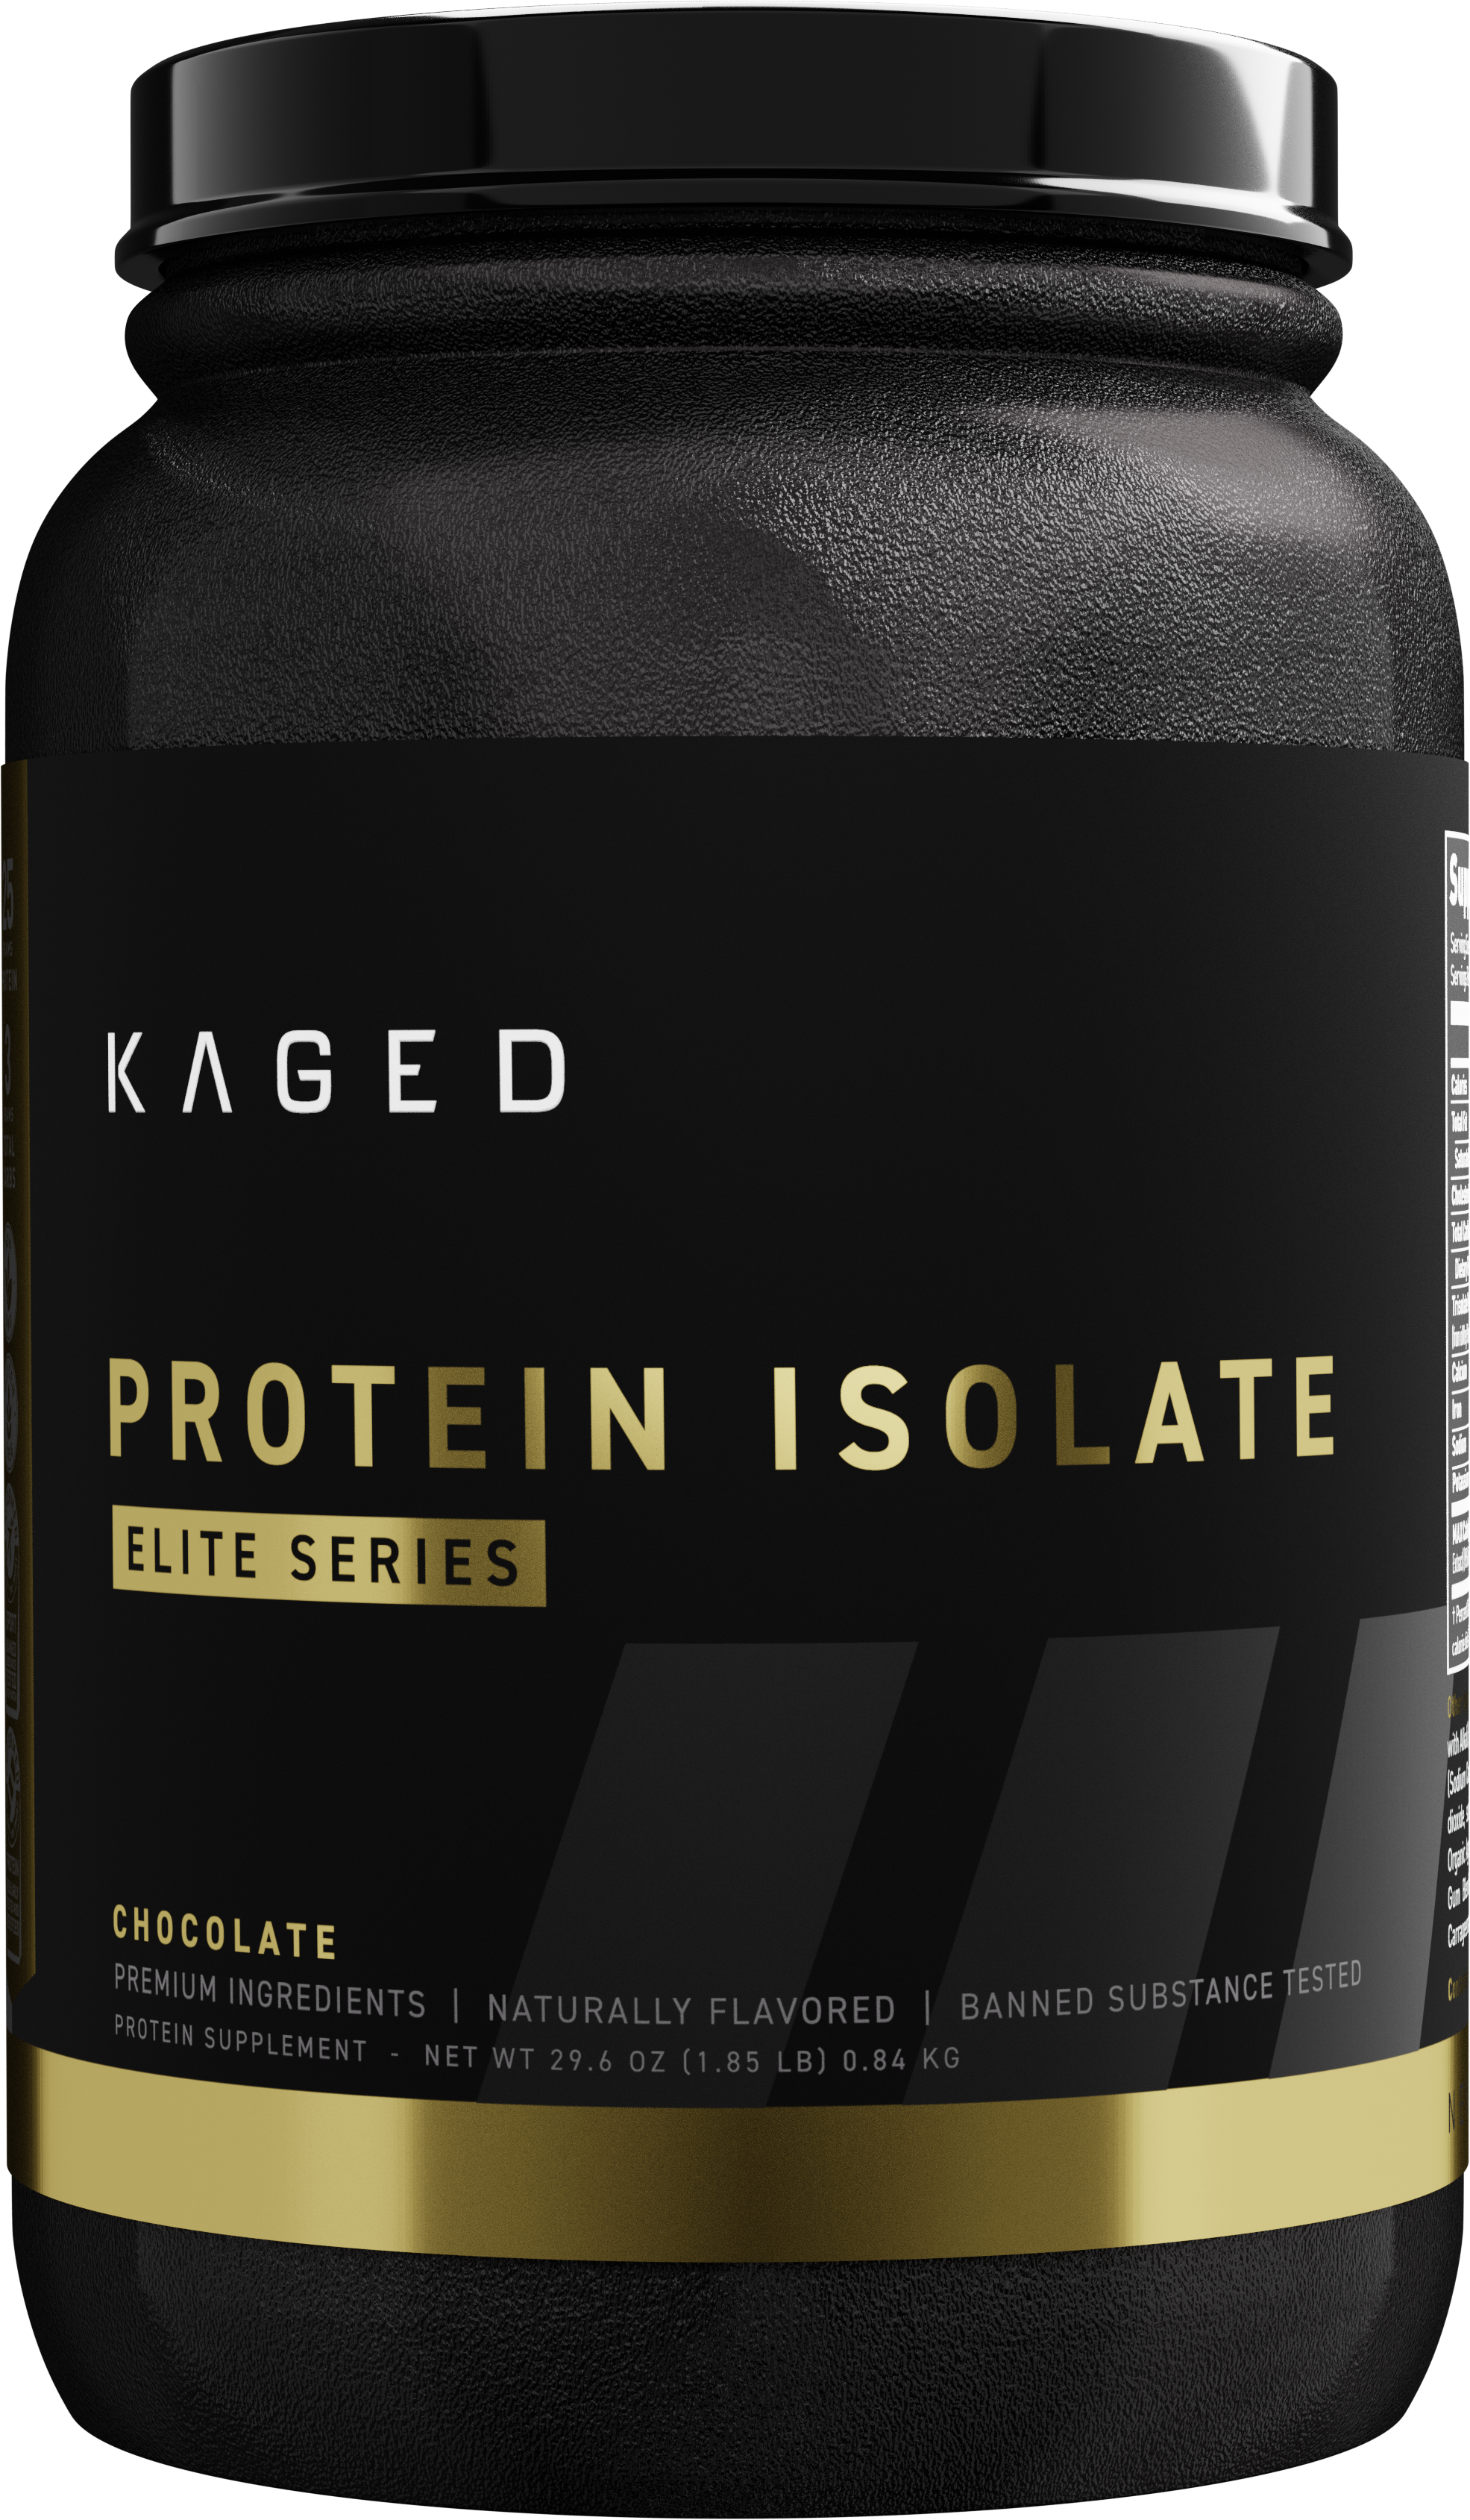 MAXed Protein Isolate